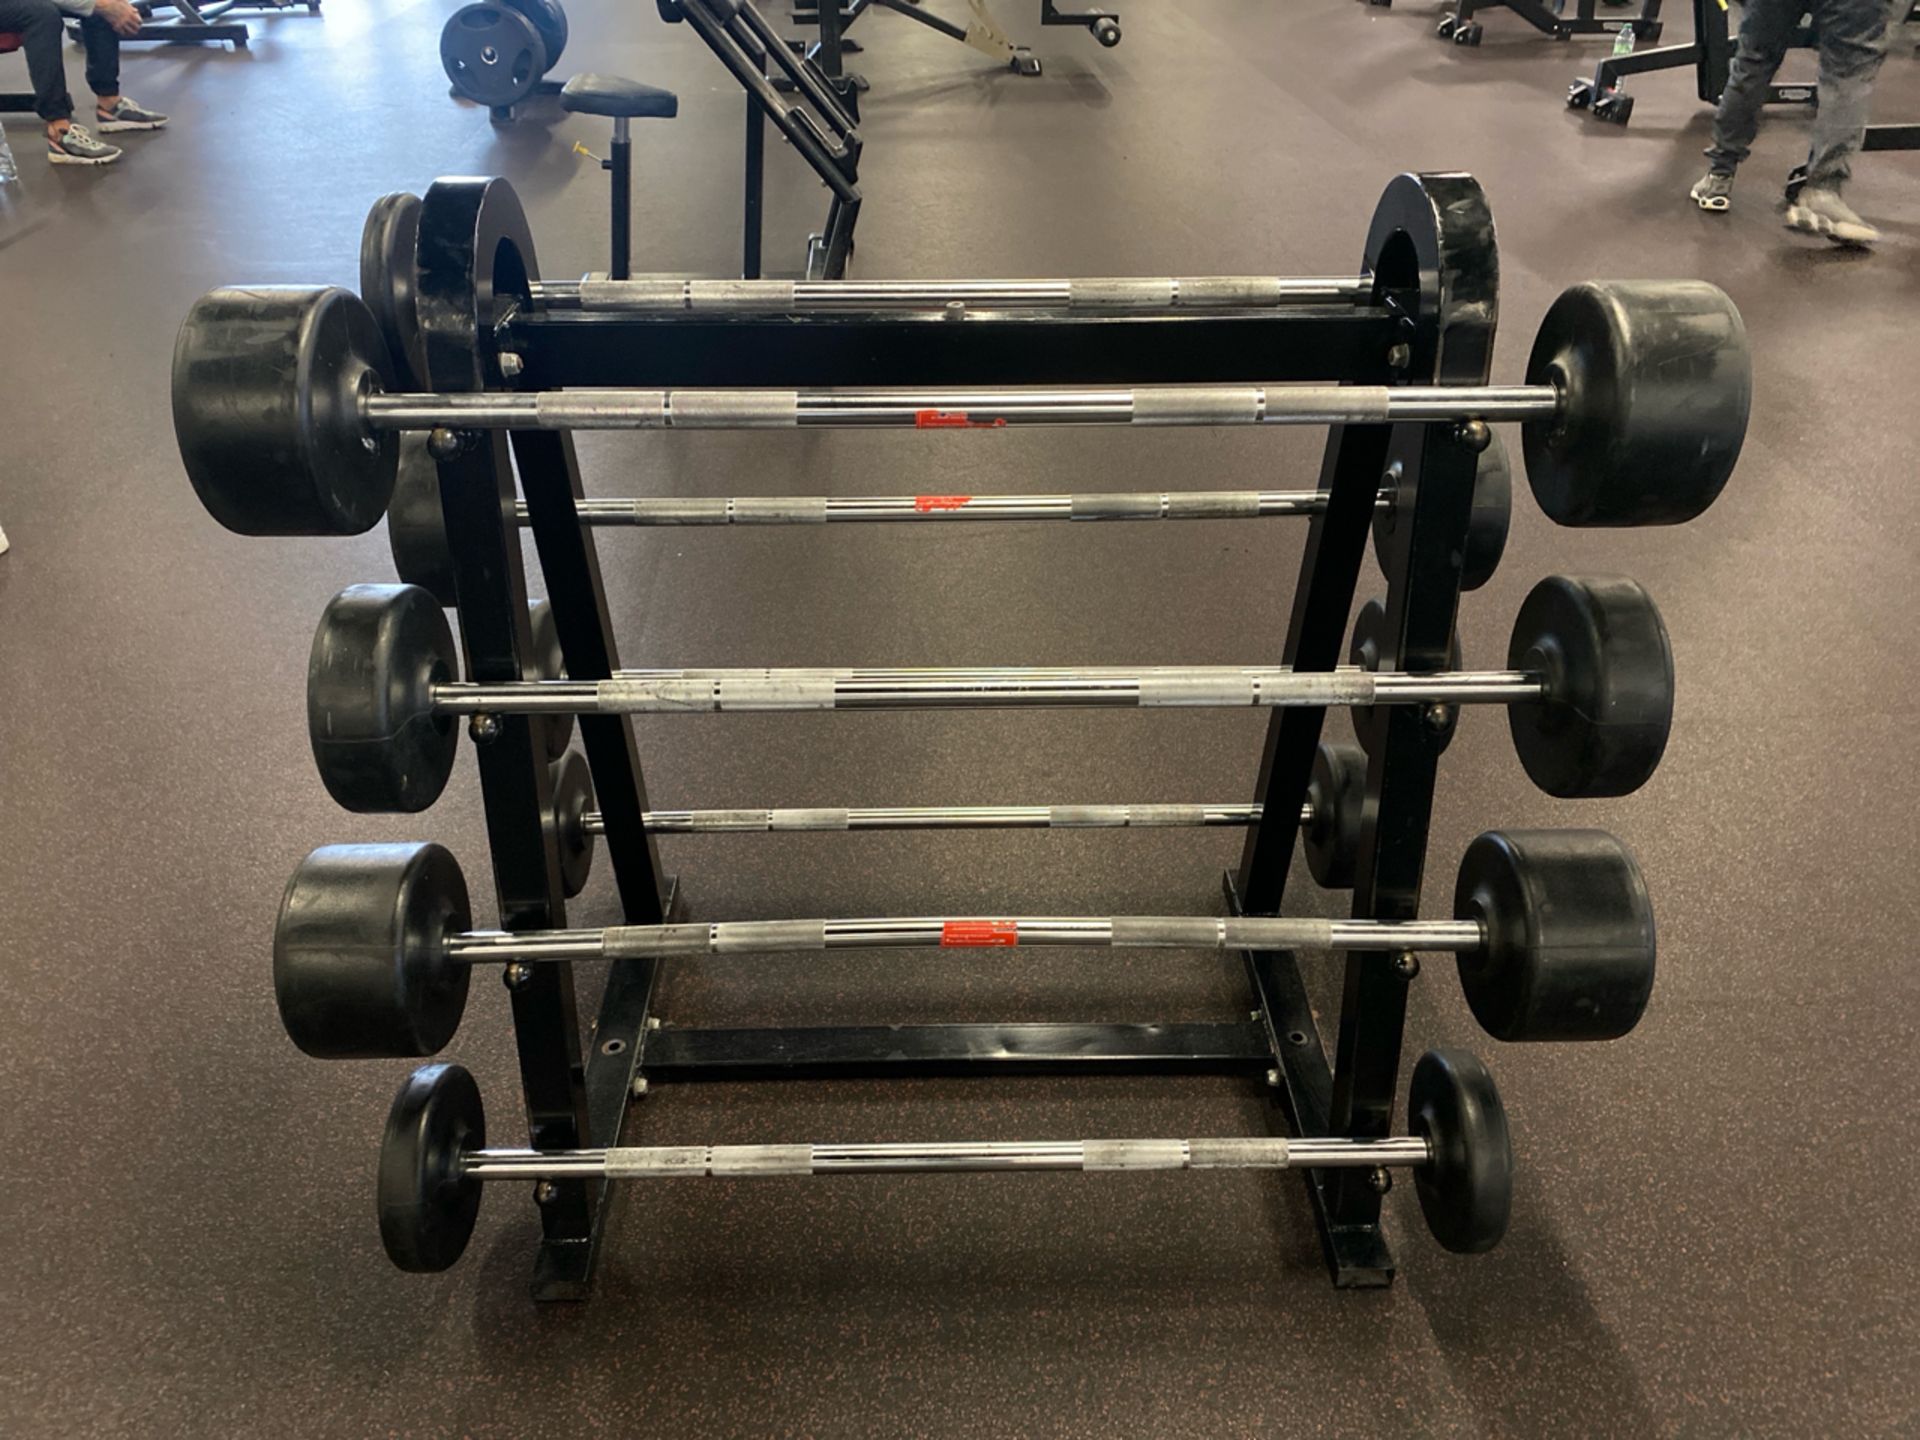 Force Weights & Bench - Image 4 of 6